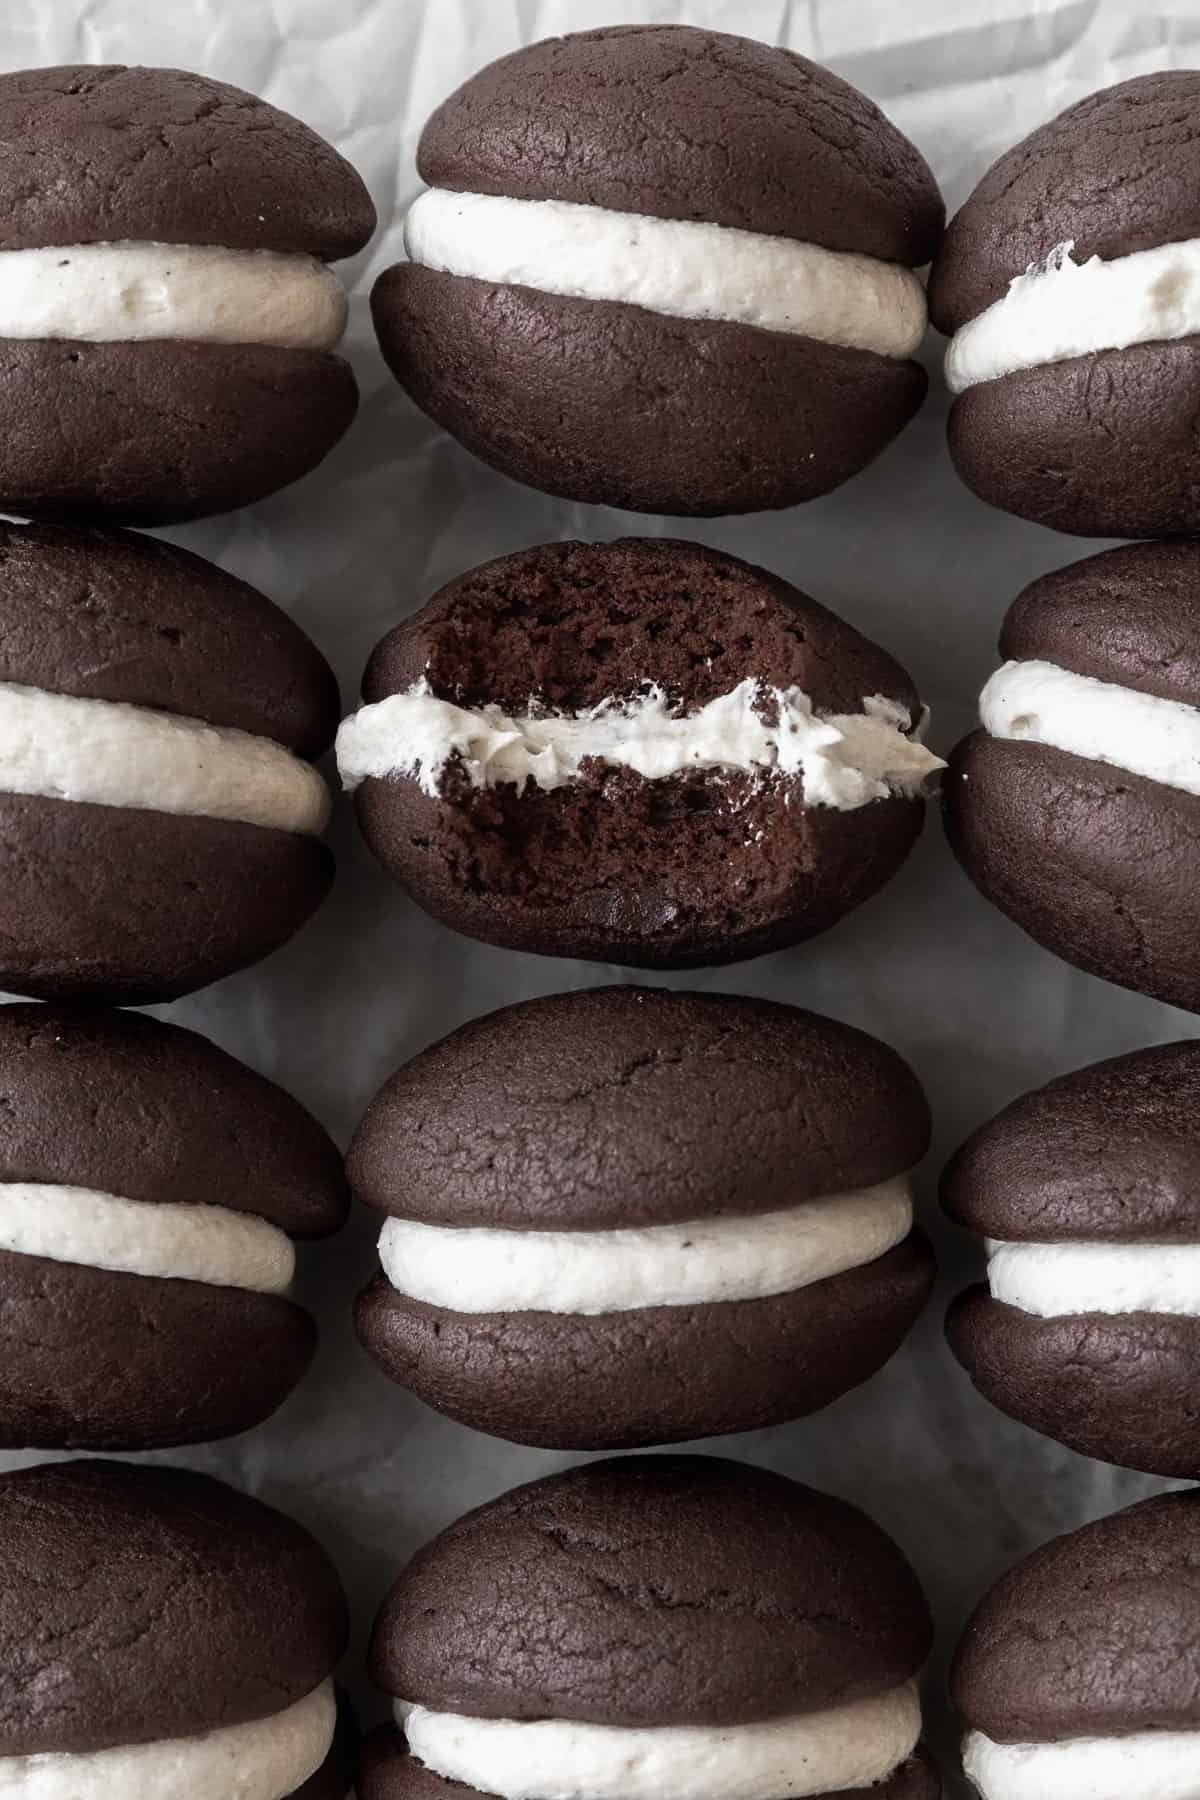 Gluten-free whoopie pies on a white sheet of parchment paper. One of the cookies has a bite taken out of it.